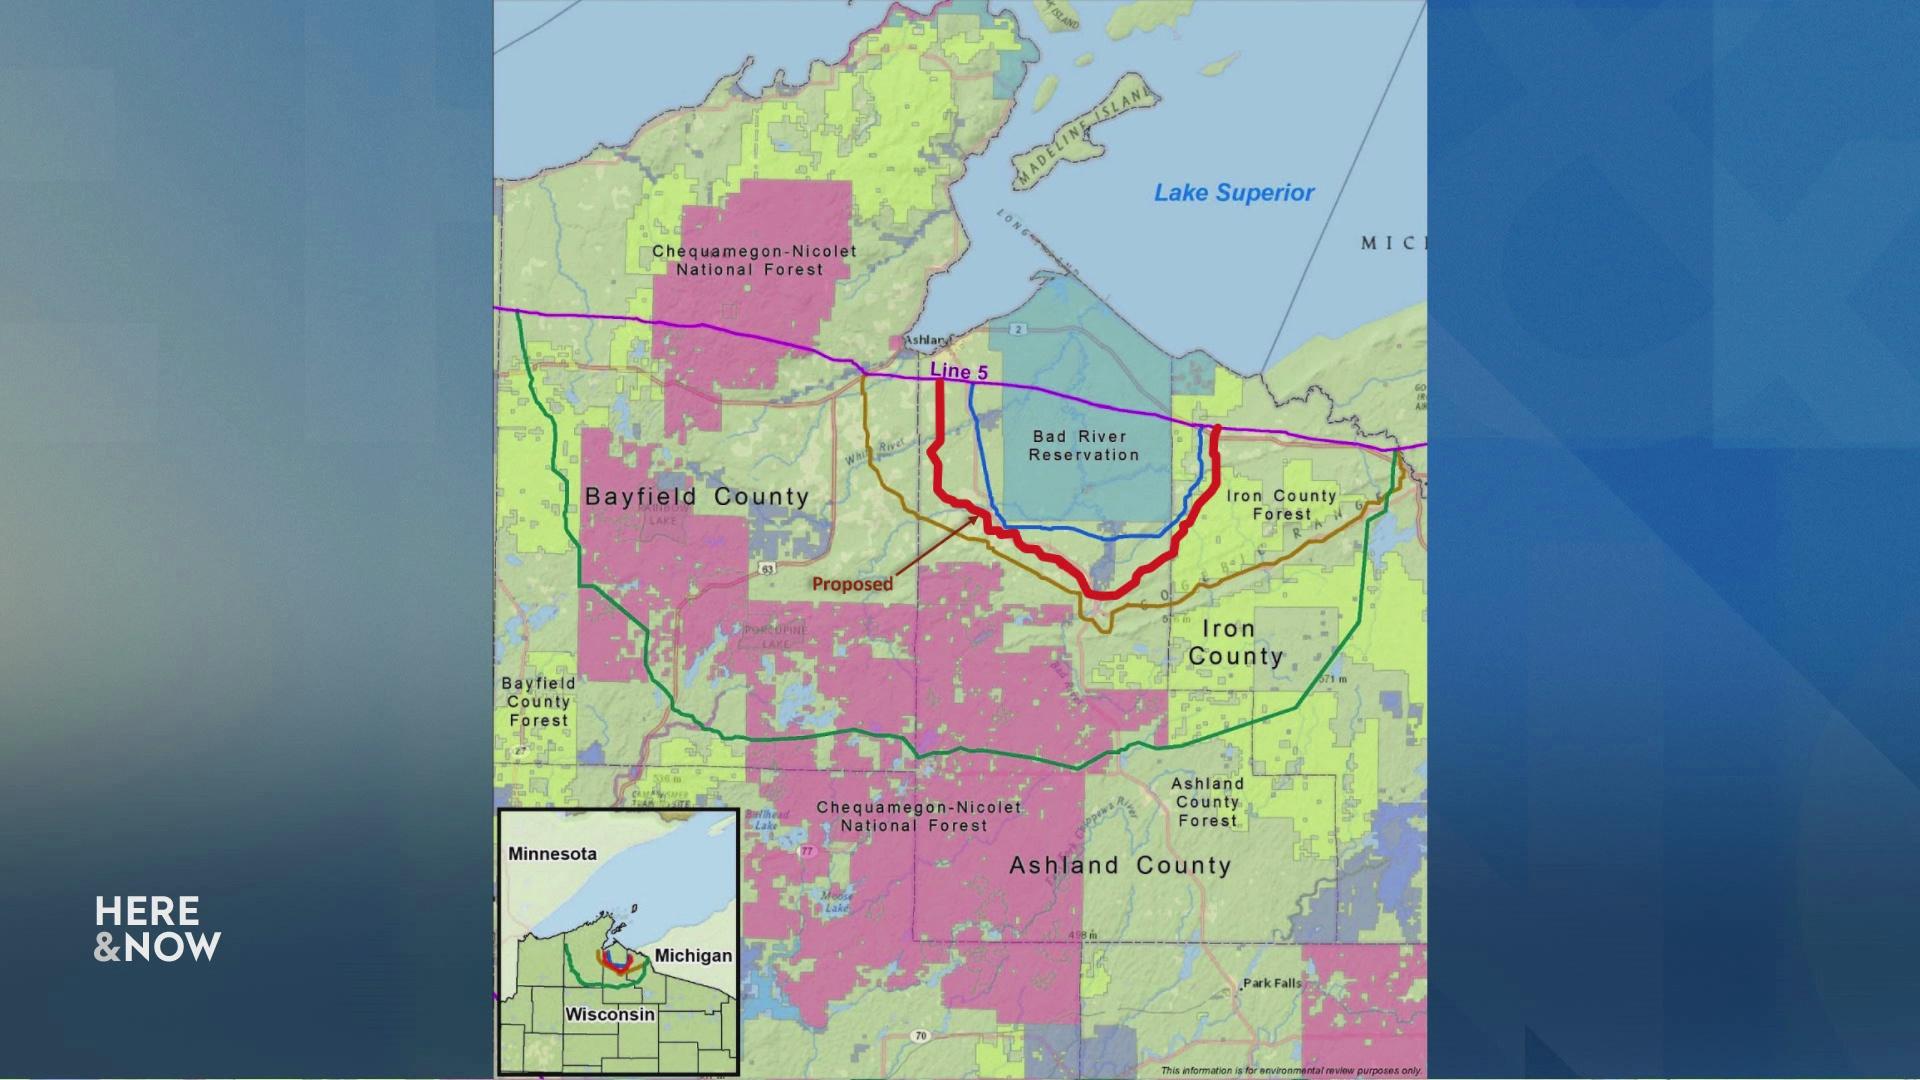 A graphic of northern Wisconsin shows areas in various colors with a red line depicting an additional reroute to the Enbridge Line 5 pipeline.